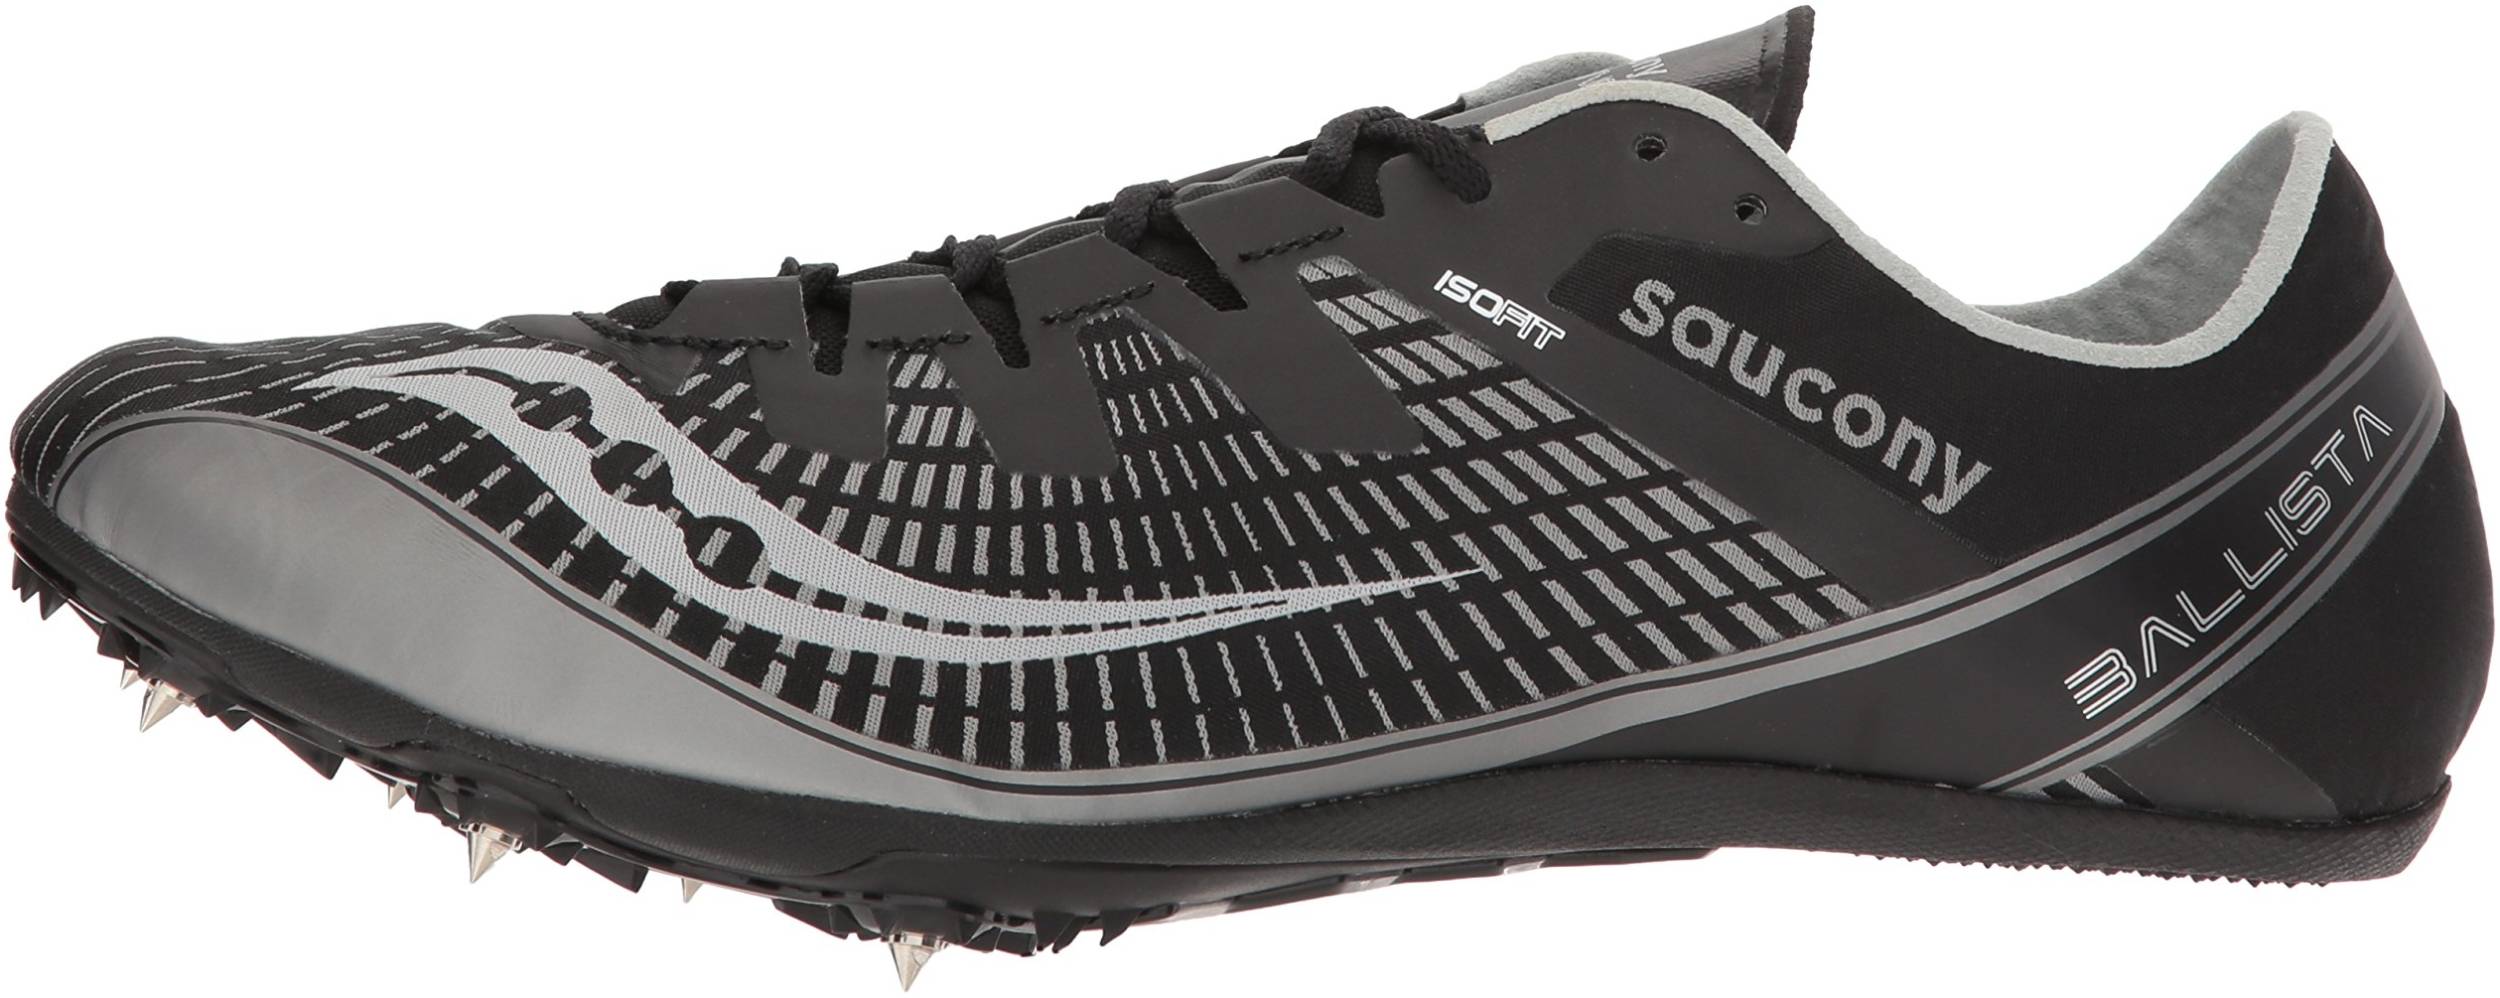 saucony vendetta spikes review